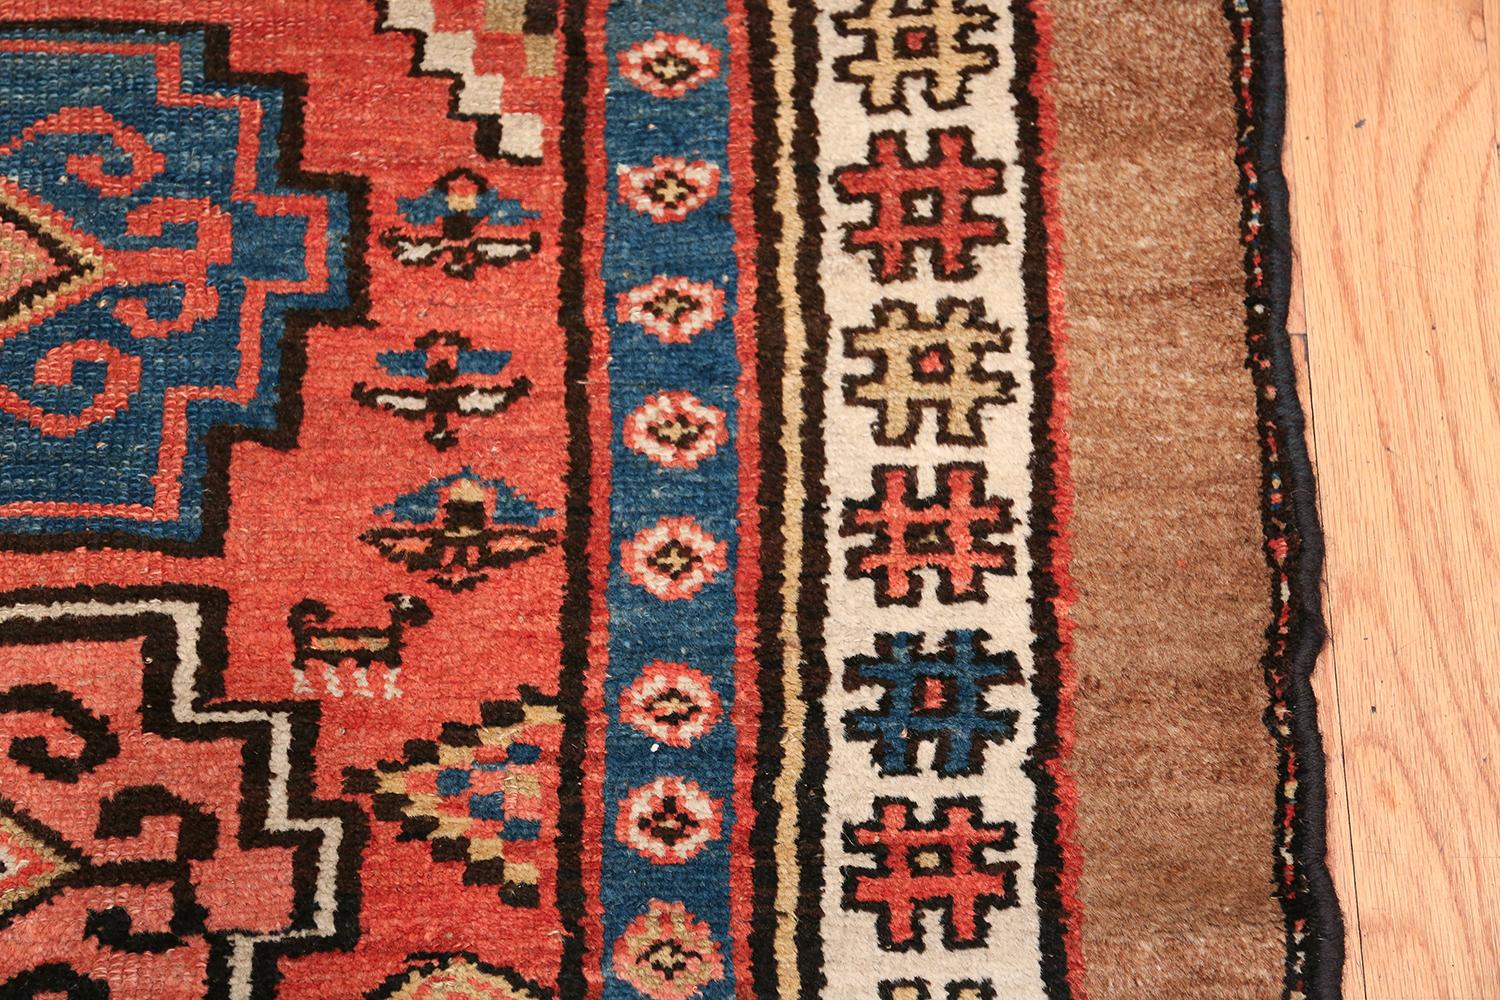 20th Century Antique Persian Northwest Rug. Size: 3 ft 6 in x 8 ft 4 in (1.07 m x 2.54 m)